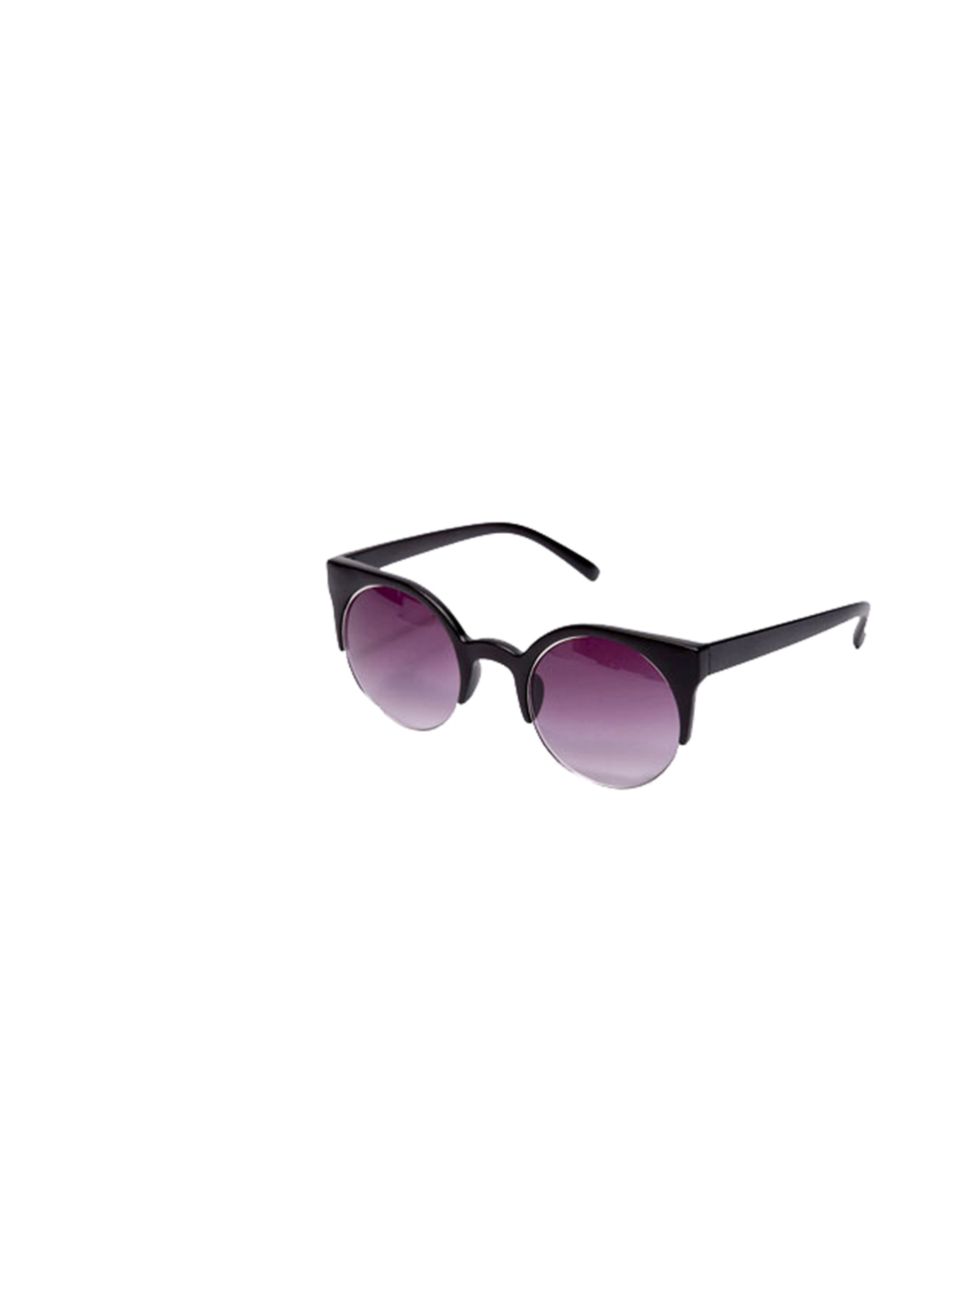 <p>The must-have shade of the summer season is the cat-eye. And at £16 you can afford to invest in more than just one pair <a href="http://www.urbanoutfitters.co.uk/cats-eye-sunglasses/invt/5758433200940/&amp;bklist=">Urban Outfitters</a> cats eye sungla